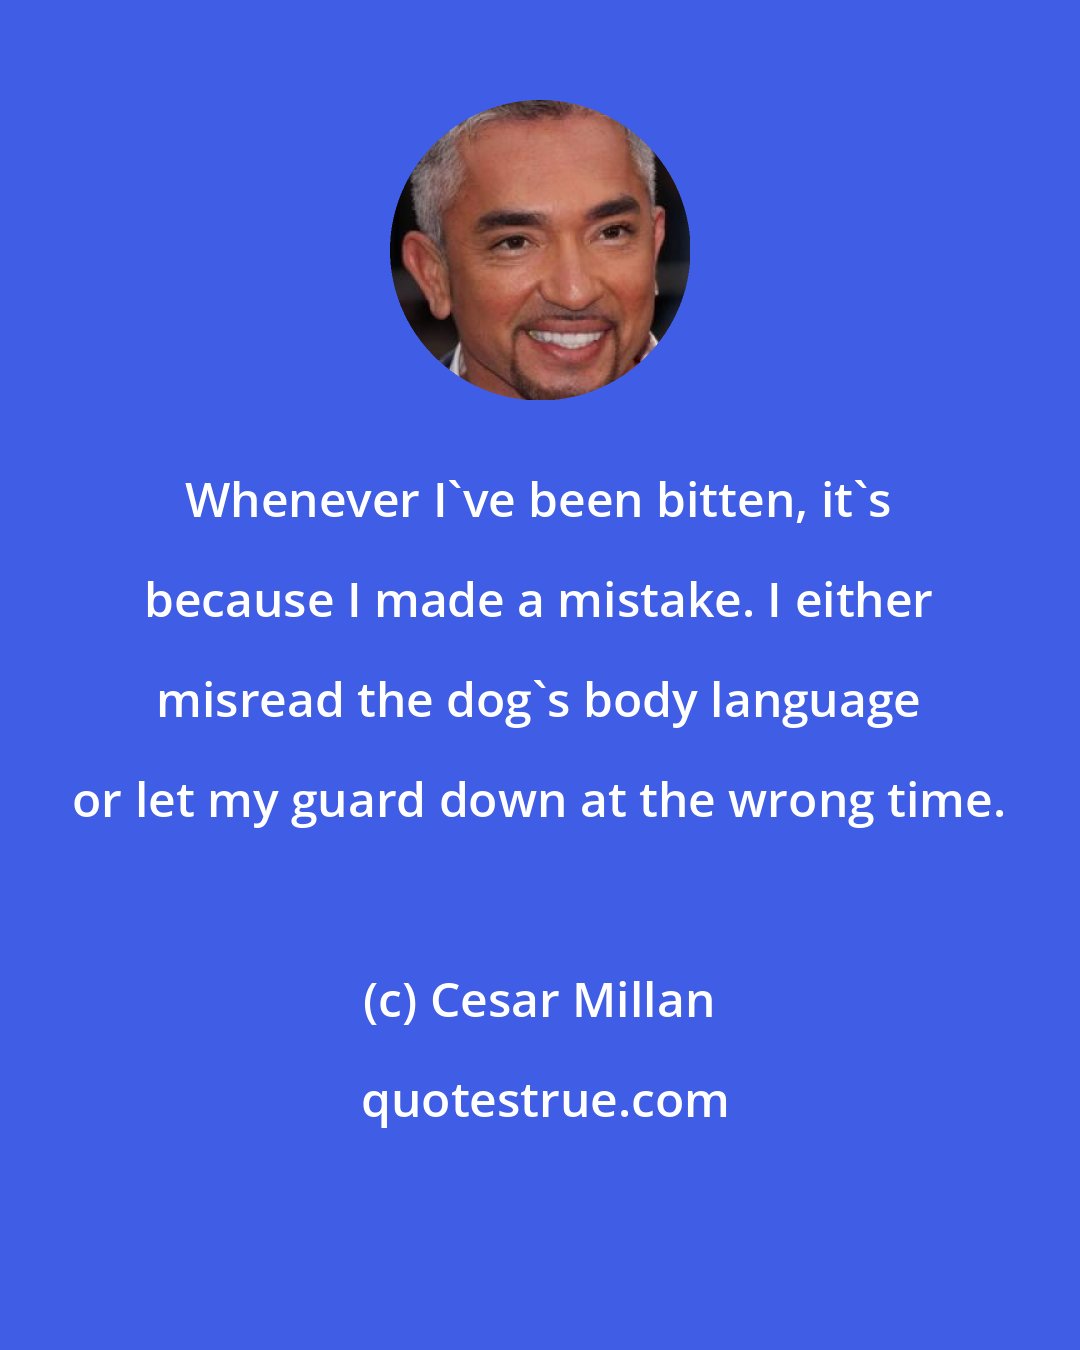 Cesar Millan: Whenever I've been bitten, it's because I made a mistake. I either misread the dog's body language or let my guard down at the wrong time.